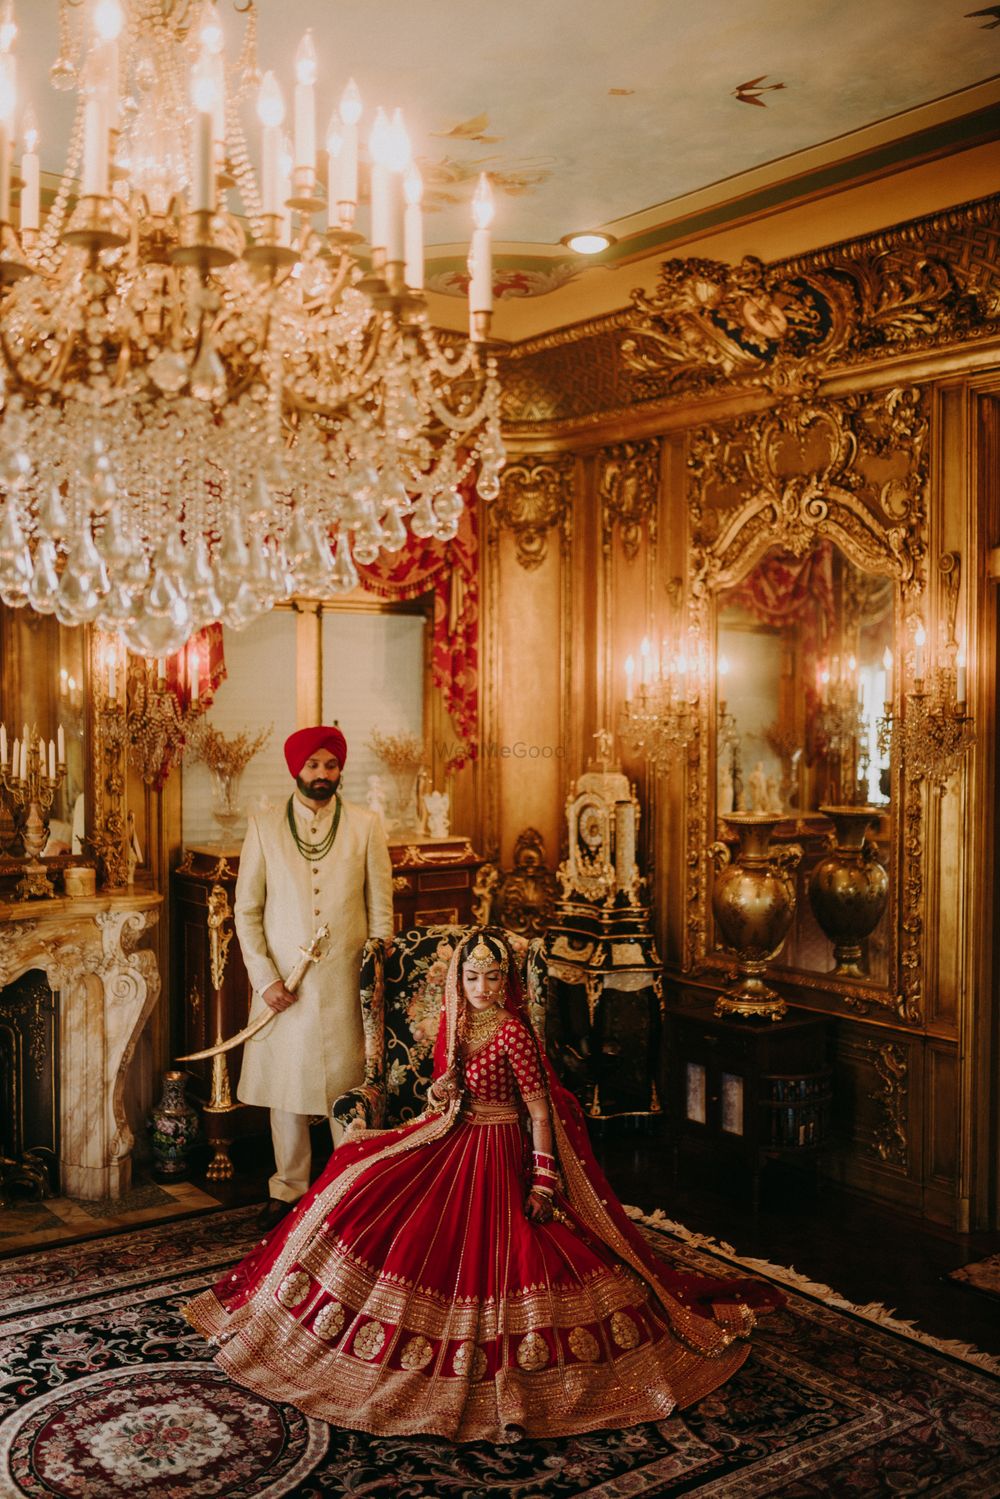 Photo of regal post wedding shot with bride in a red lehenga